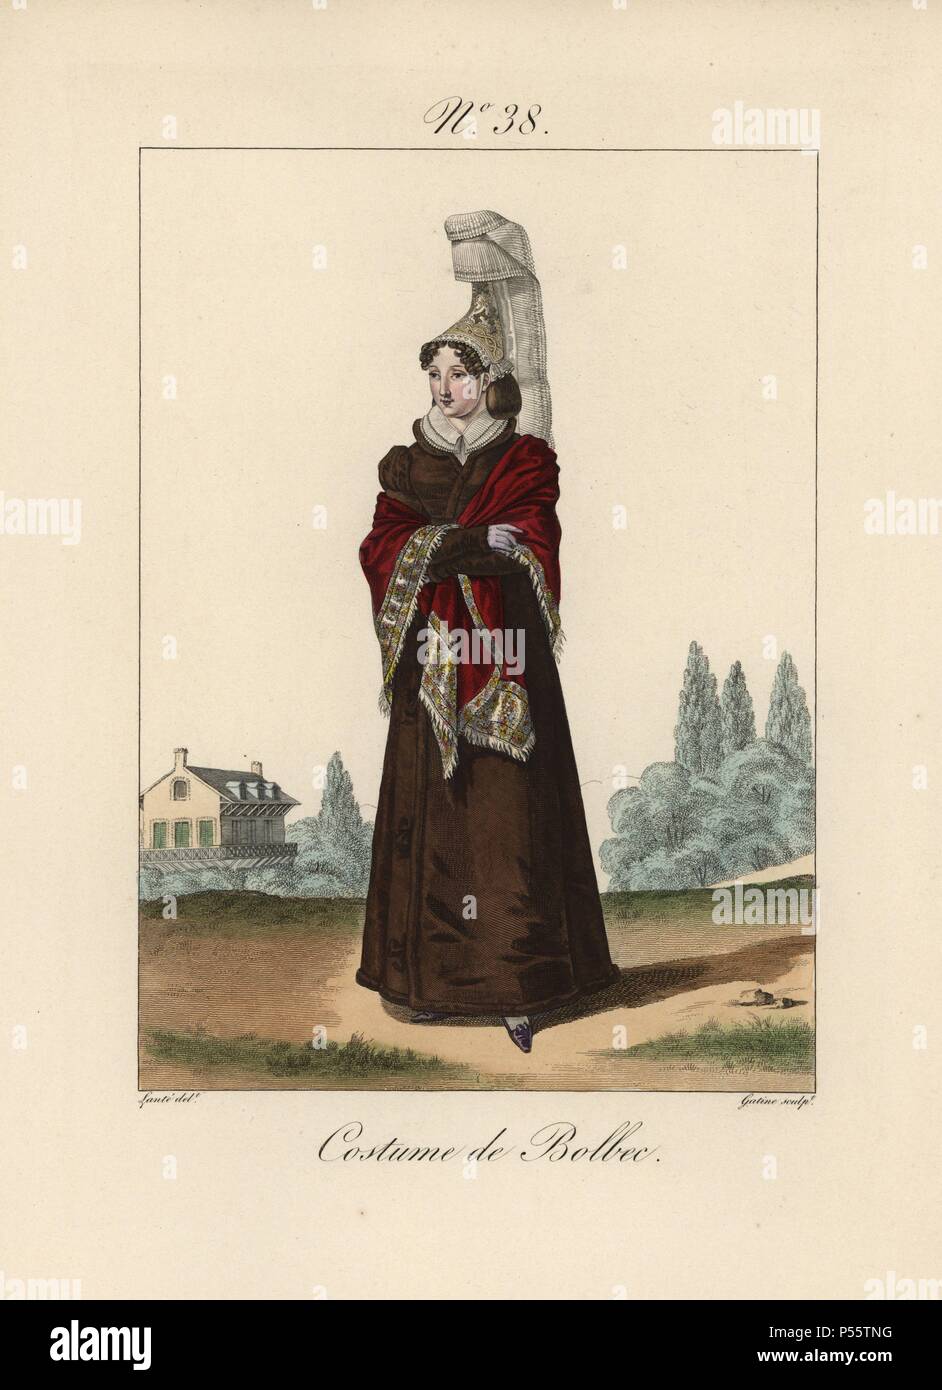 Costume of Bolbec. The women of Bolbec only wear this costume to baptisms, weddings, family reunions or festivals at church. The rest of the time they wear the fashions of Paris. Hand-colored fashion plate illustration by Lante engraved by Gatine from Louis-Marie Lante's "Costumes des femmes du Pays de Caux," 1827/1885. With their tall Alsation lace hats, the women of Caux and Normandy were famous for the elegance and style. Stock Photo